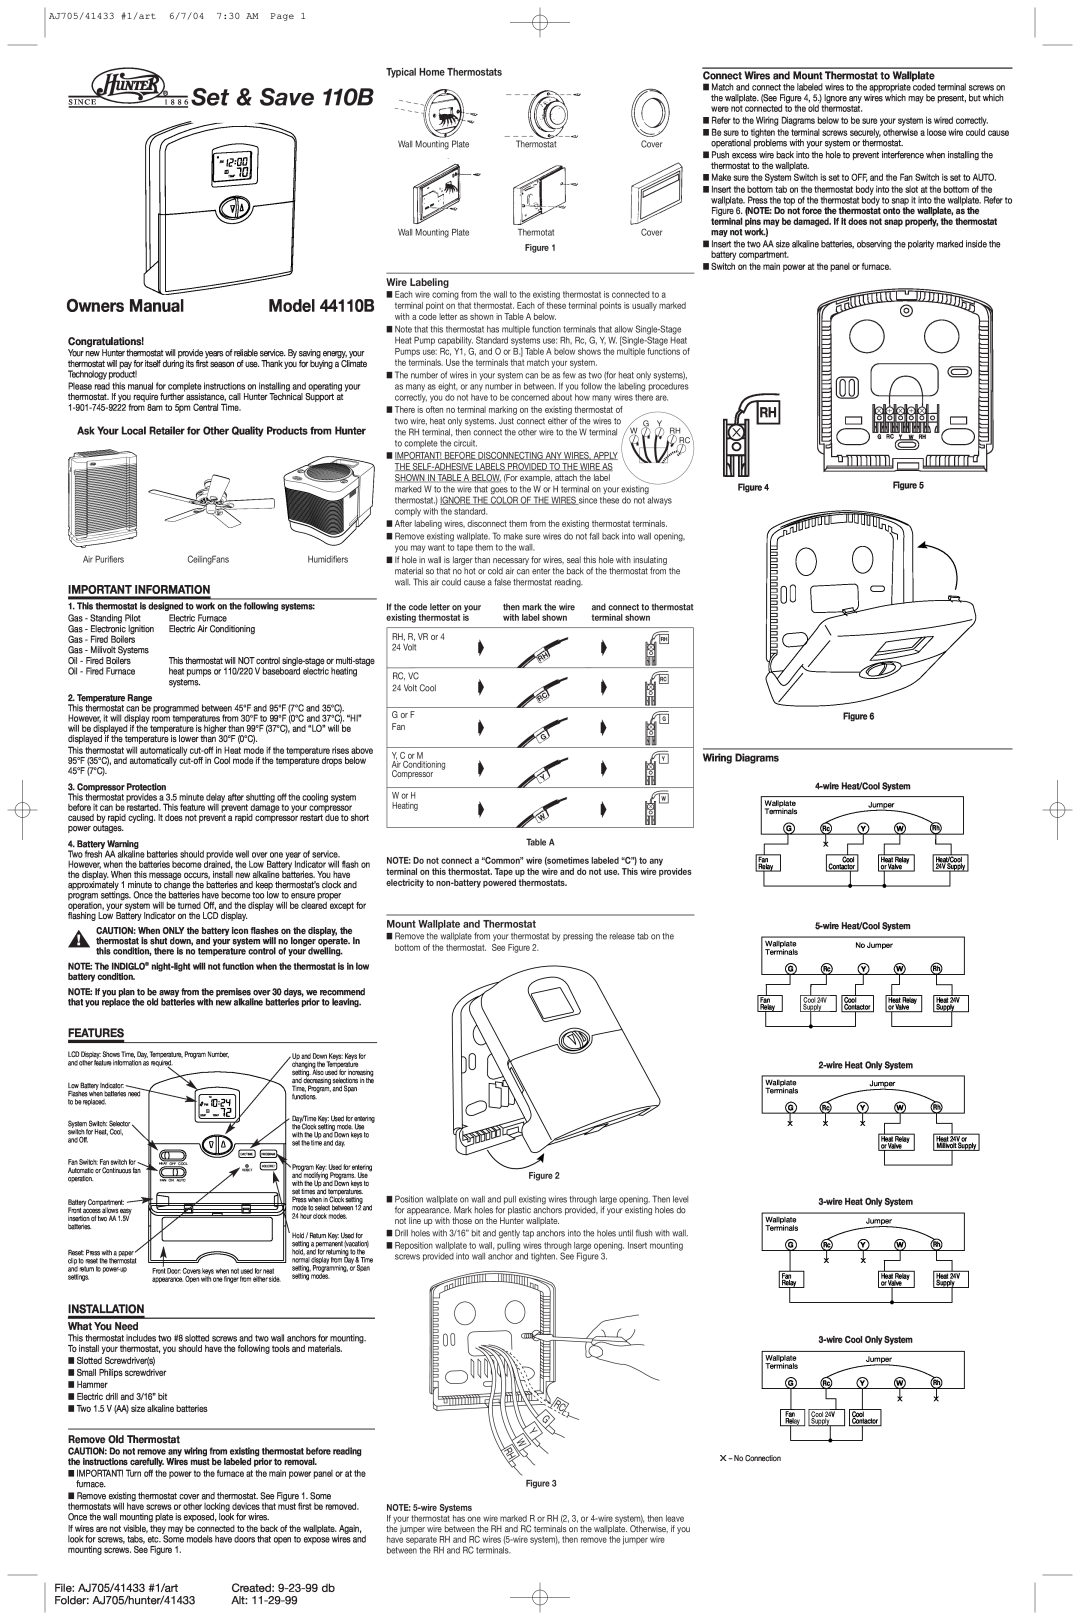 Hunter Fan 44110B owner manual Important Information, Features, Installation, File AJ705/41433 #1/art, Created 9-23-99 db 